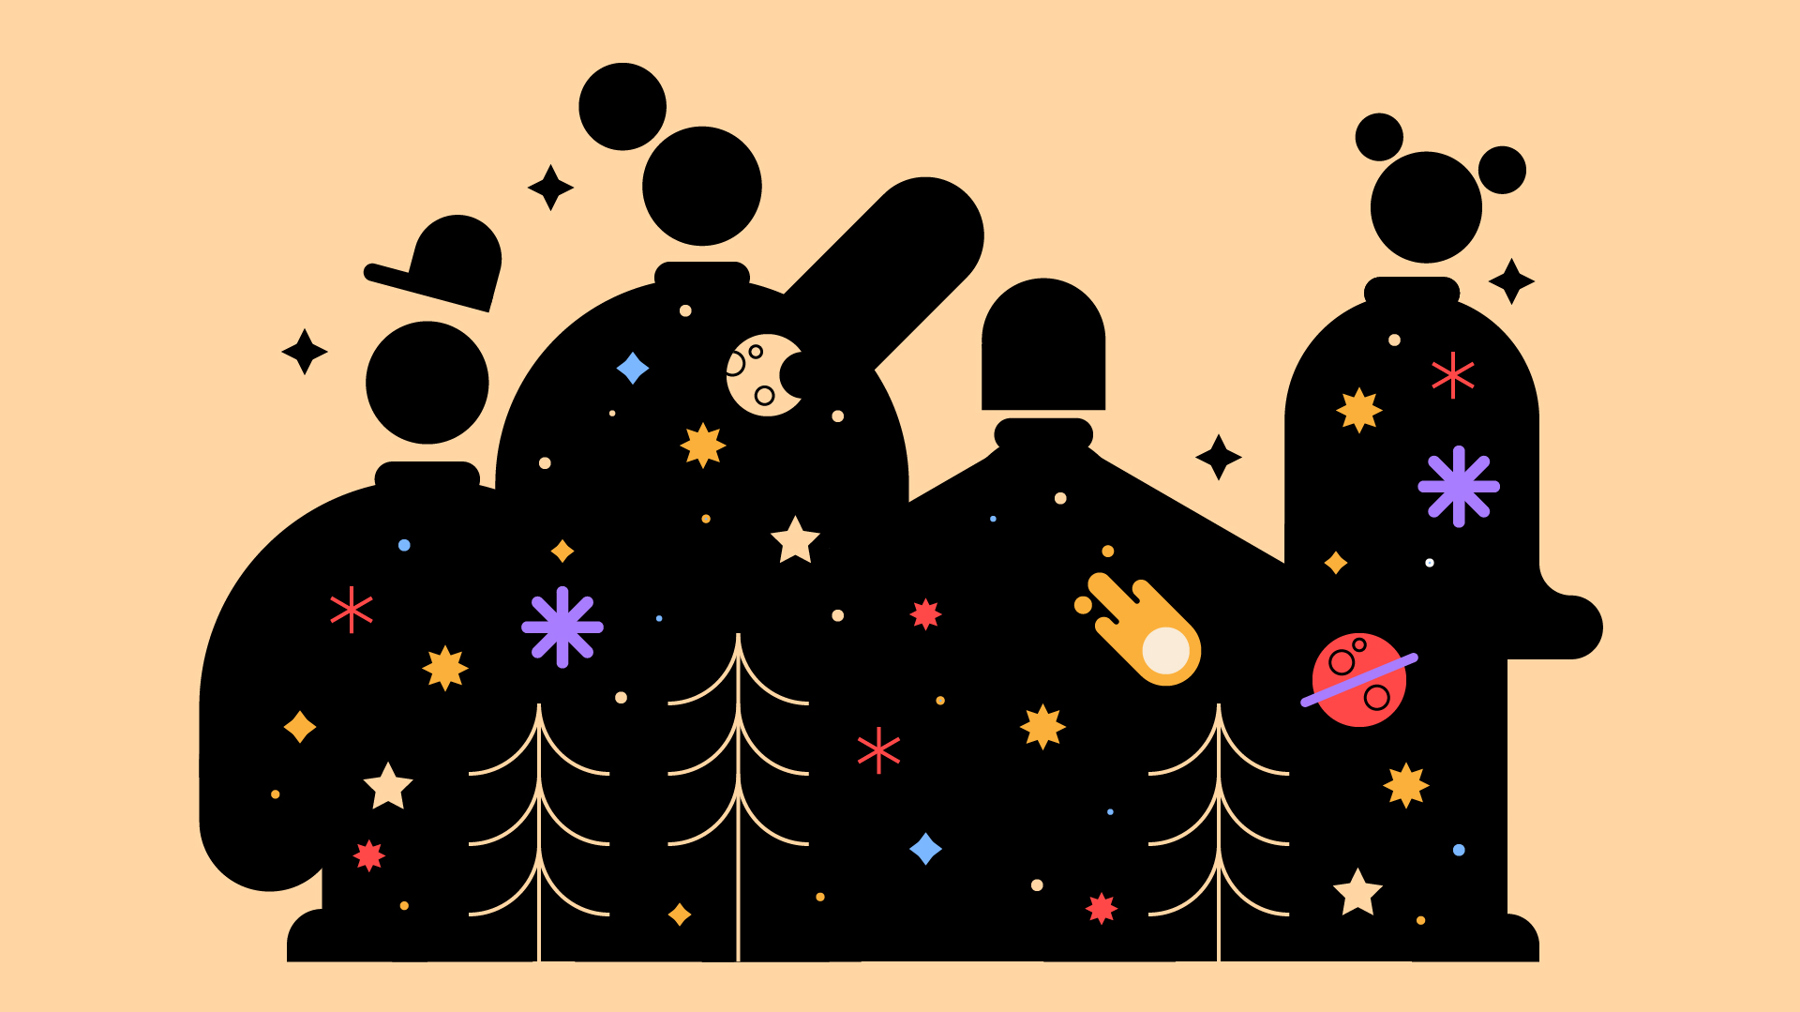 The silhouettes of four Scouts filled with the magical wonders the night sky has to offer; including stars, moons and planets.